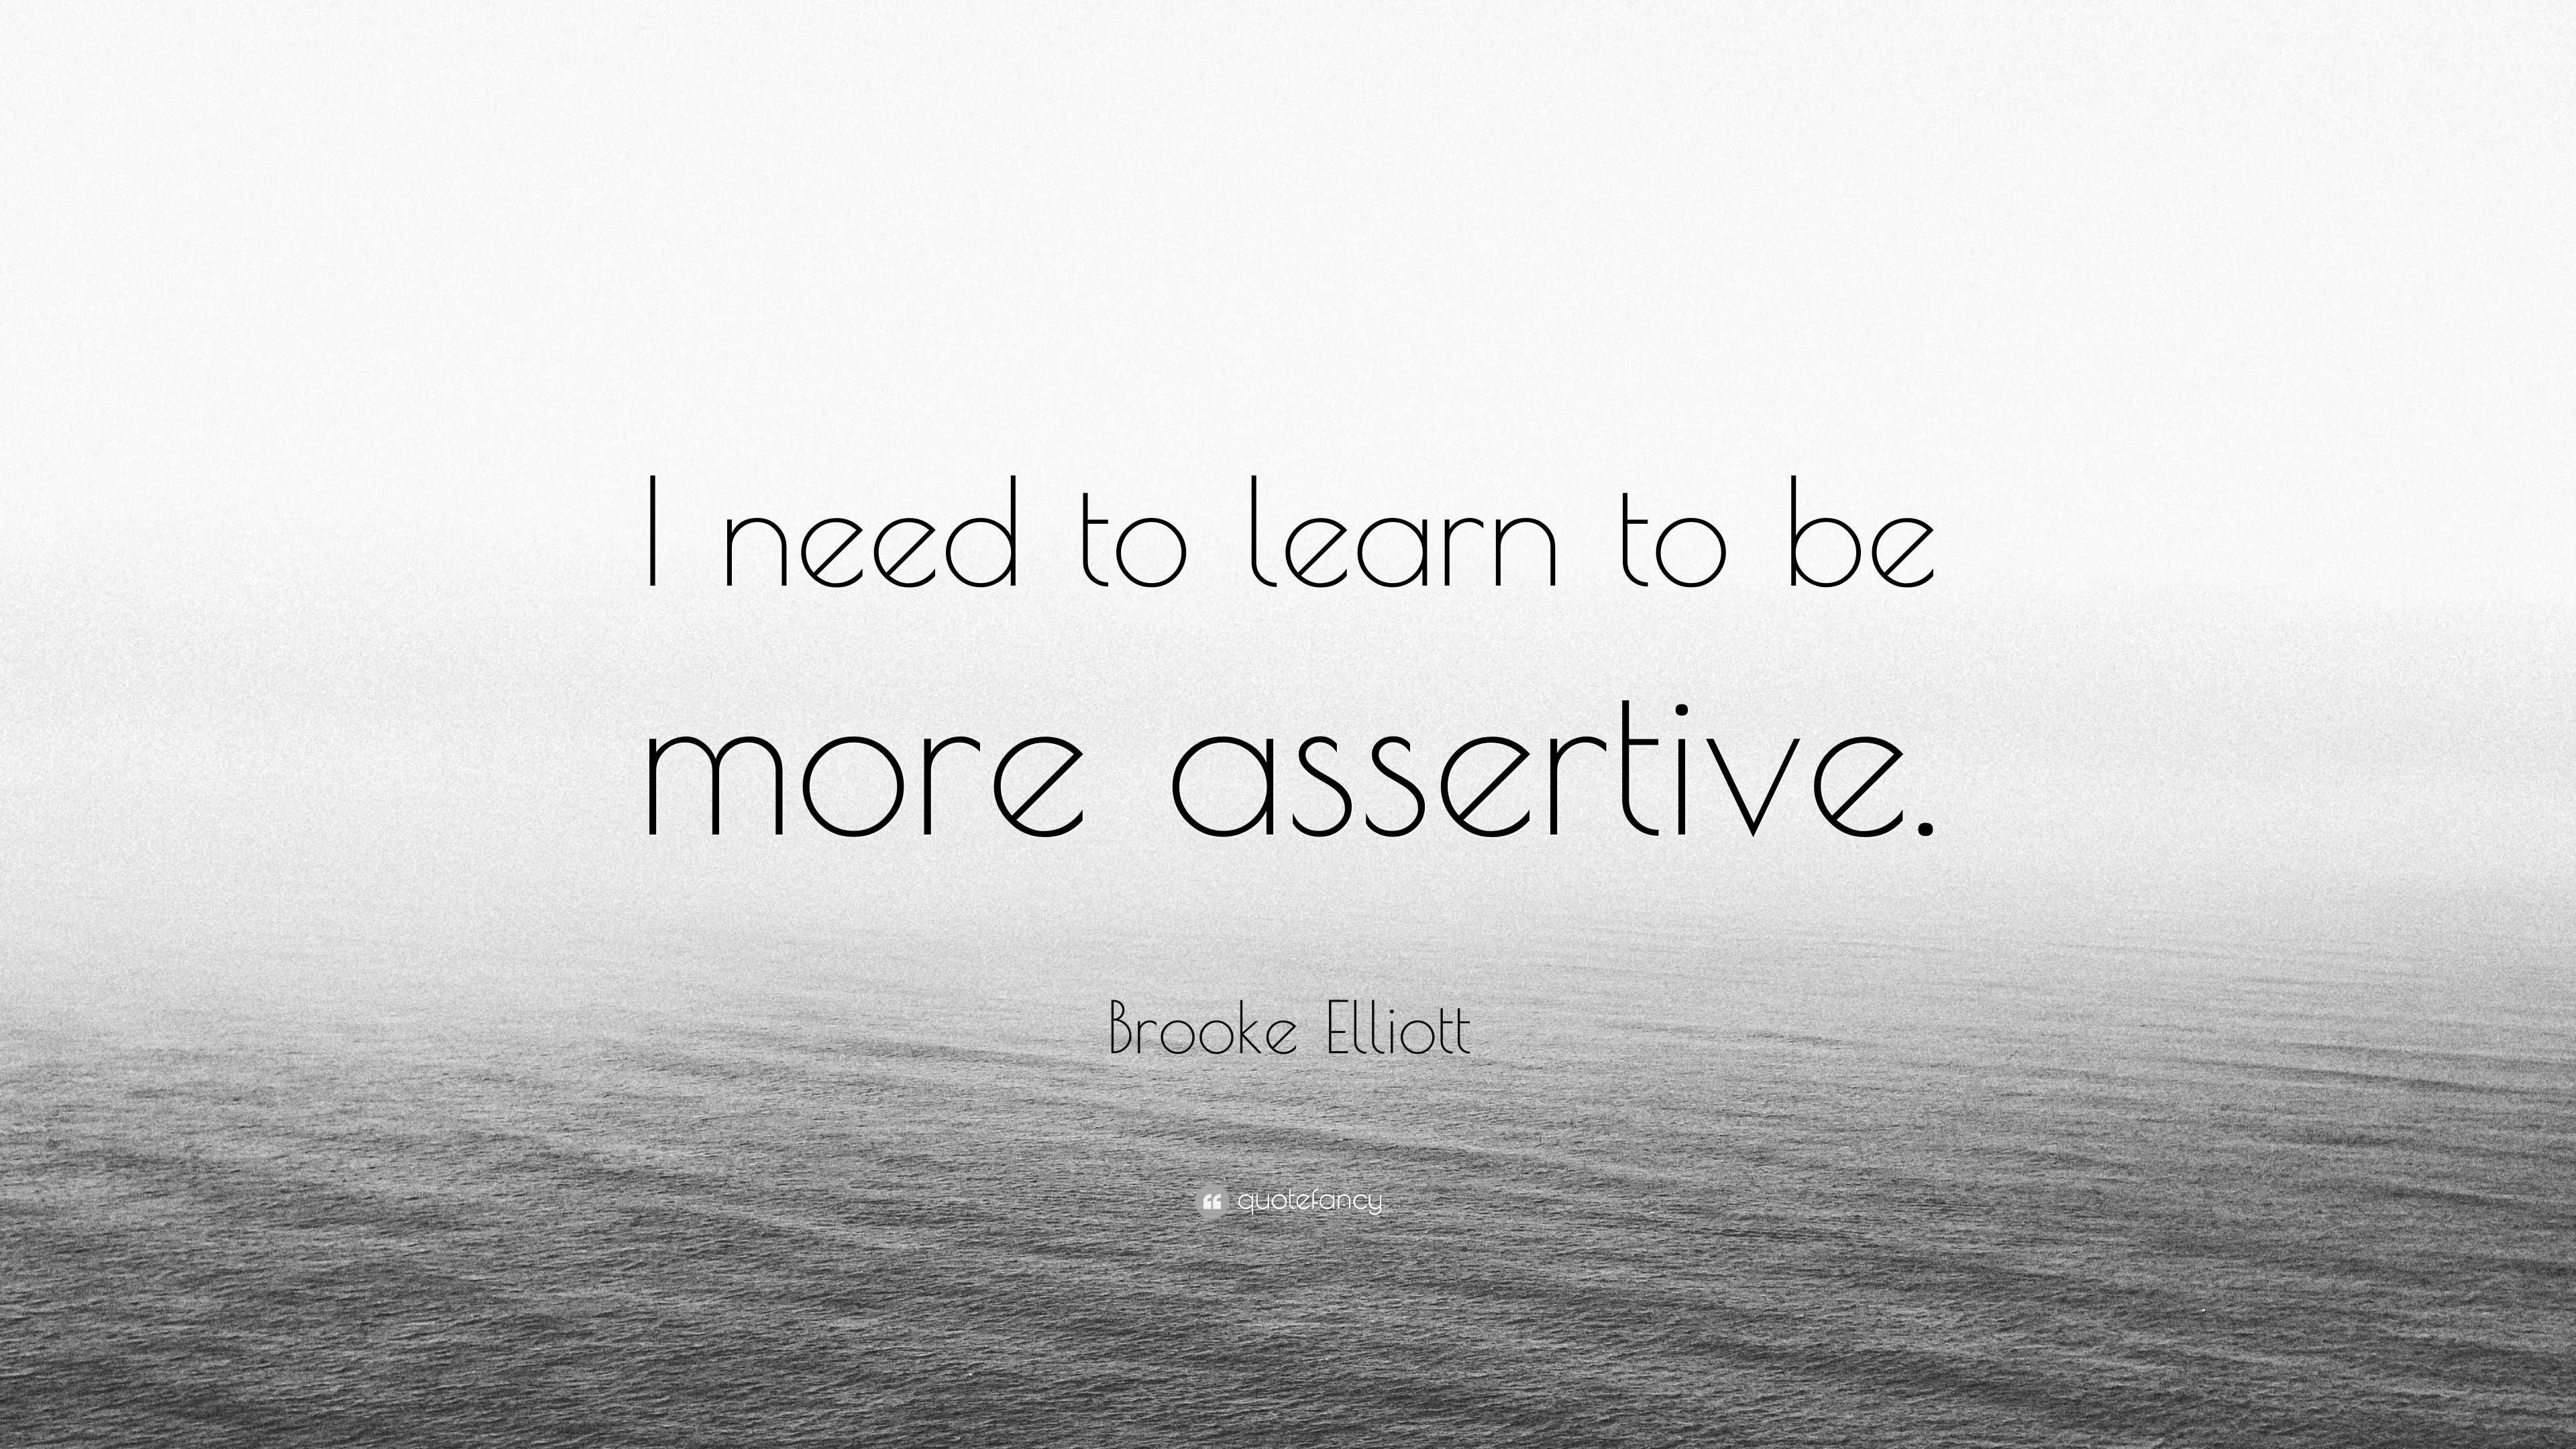 Assertive need more to be How To